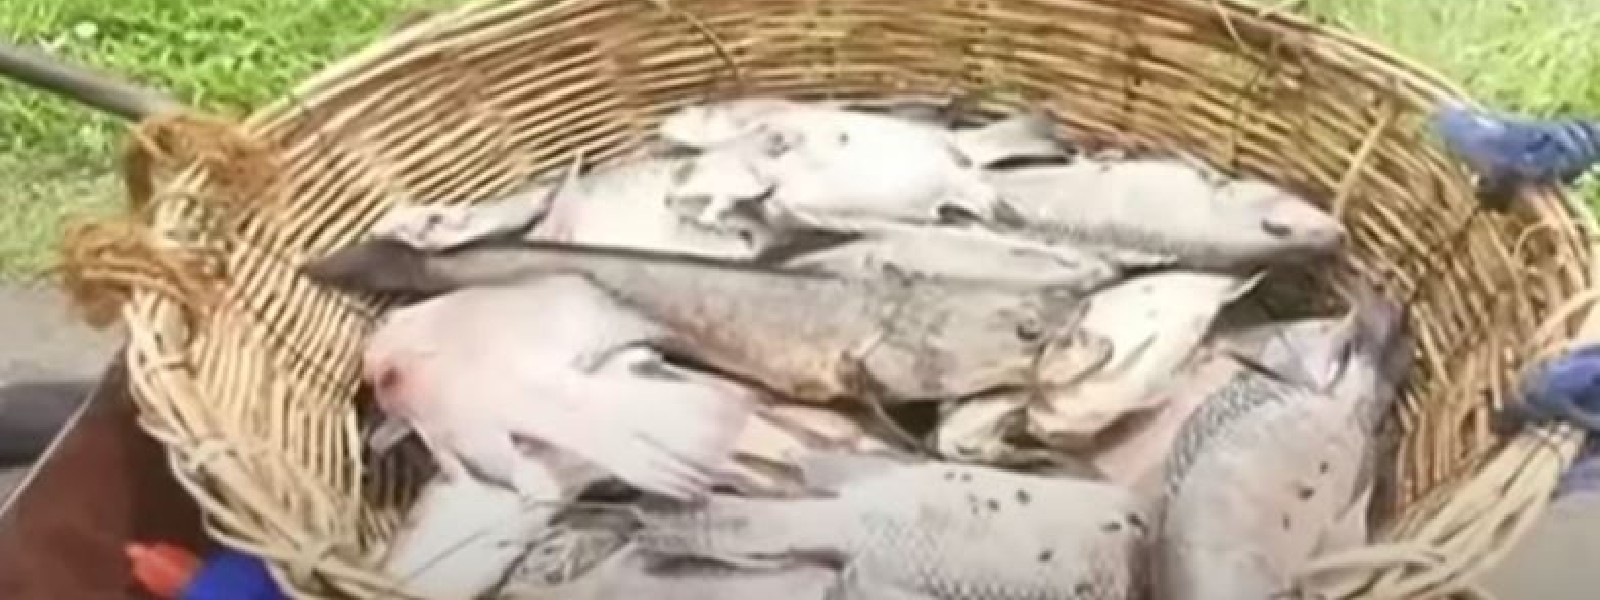 Hundreds of dead fish wash up on the banks of the Kurunegala Wewa